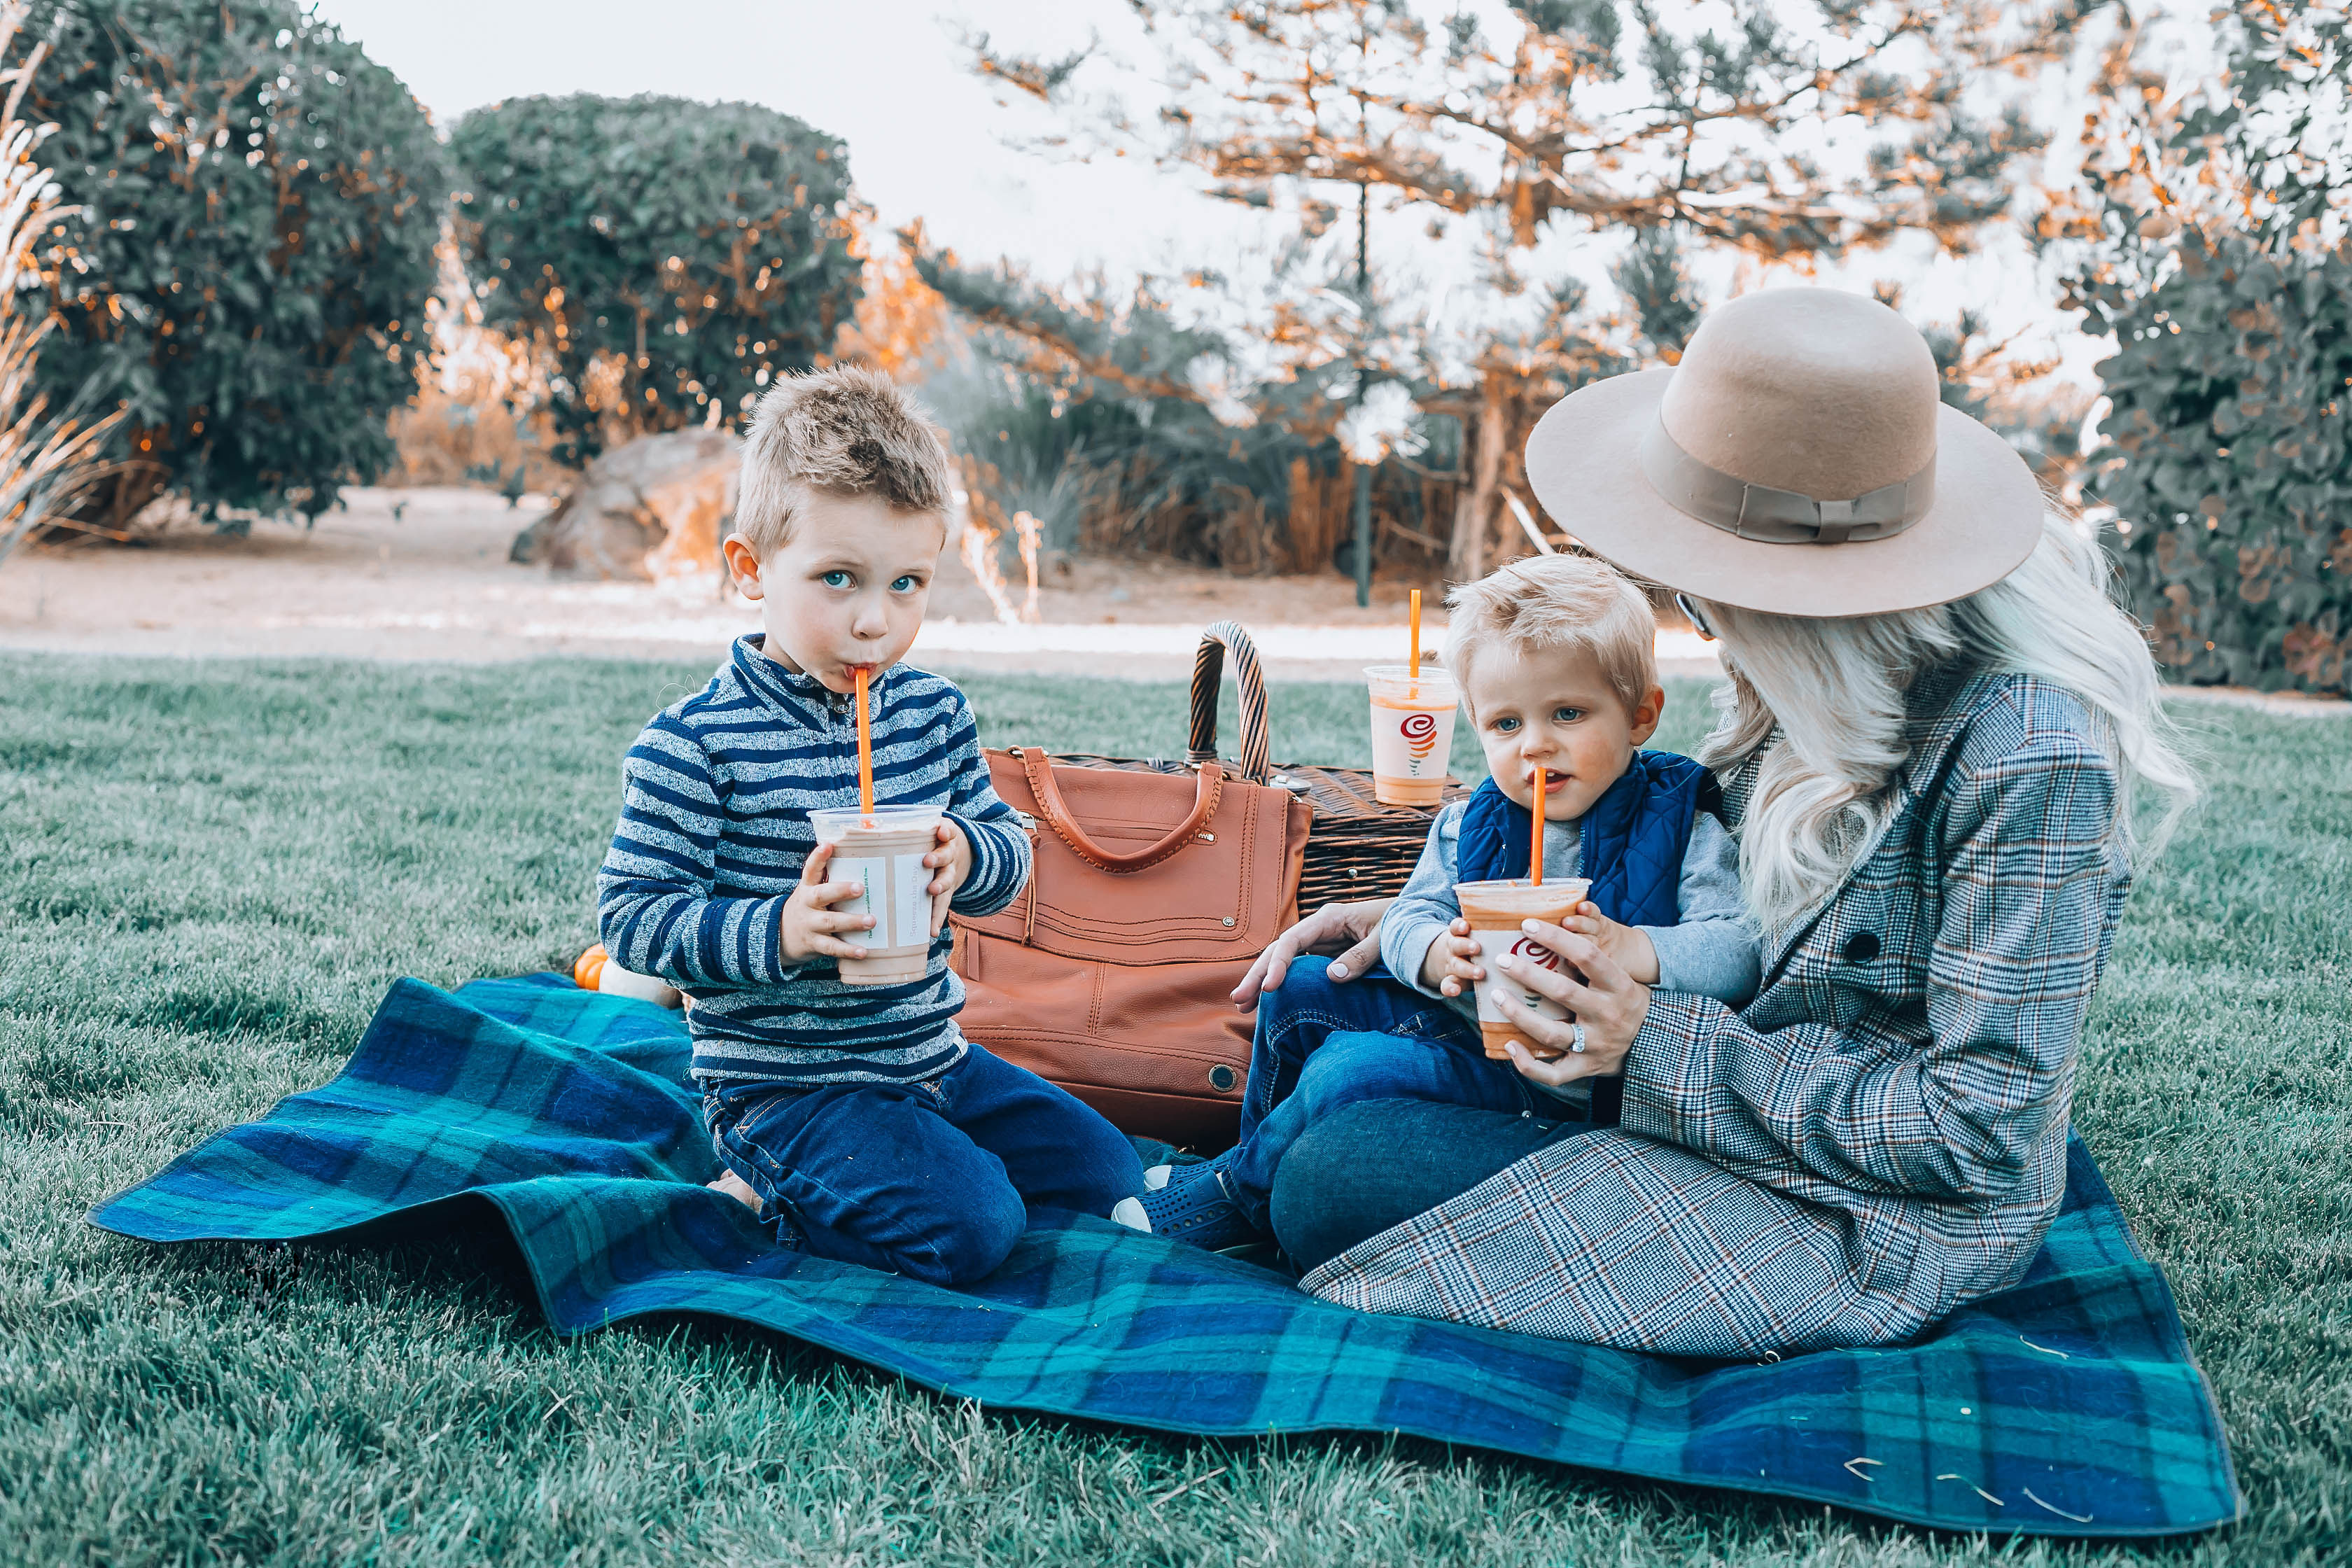 Emily Farren Wieczorek of Two Peas in a Prada talks about her love for Jamba Juice, how it fuels her family on the go, and all their new fall flavors!